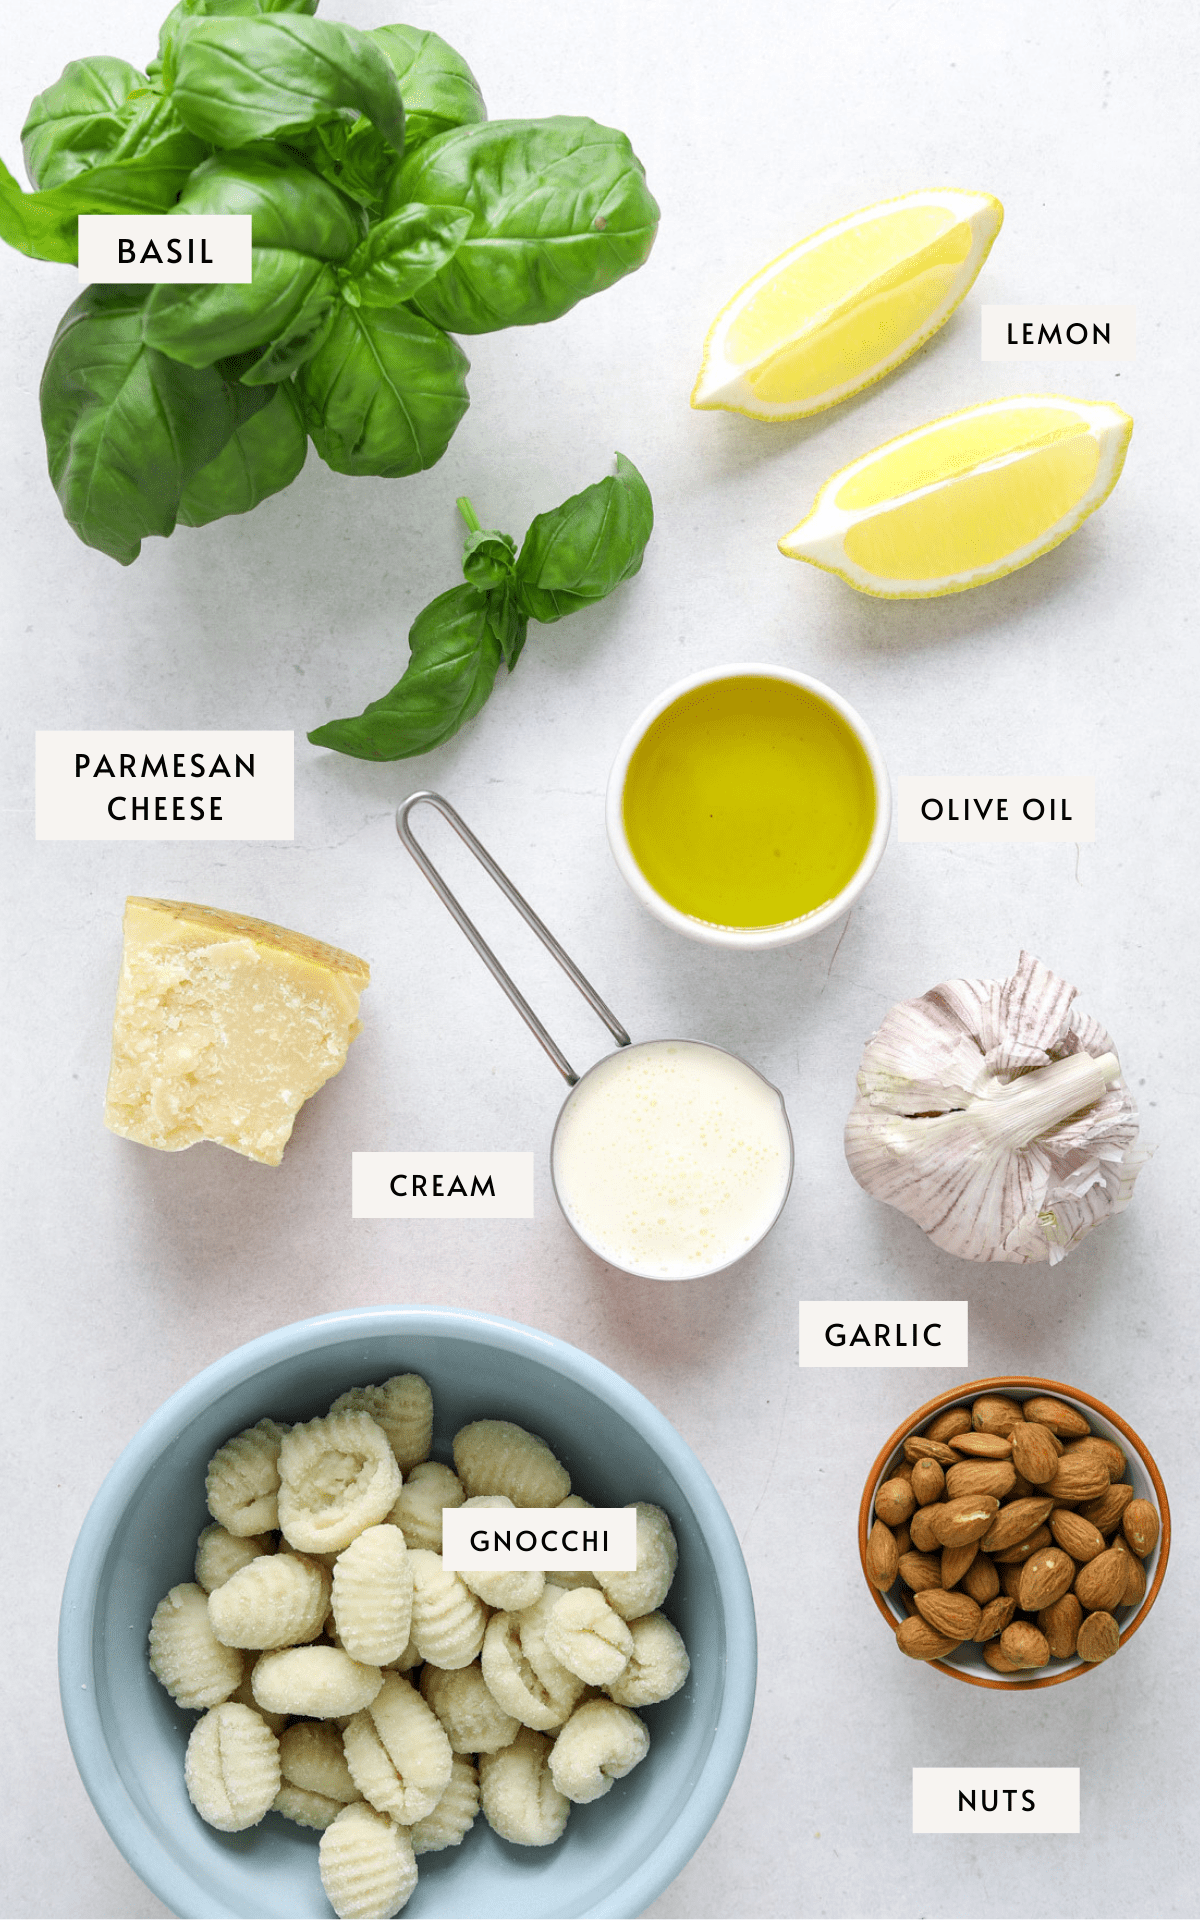 Fresh basil leaves, two lemon wedges, parmesan cheese, cream in a measuring cup, garlic, olive oil, a small bowl of almonds, gnocchi in a blue bowl.